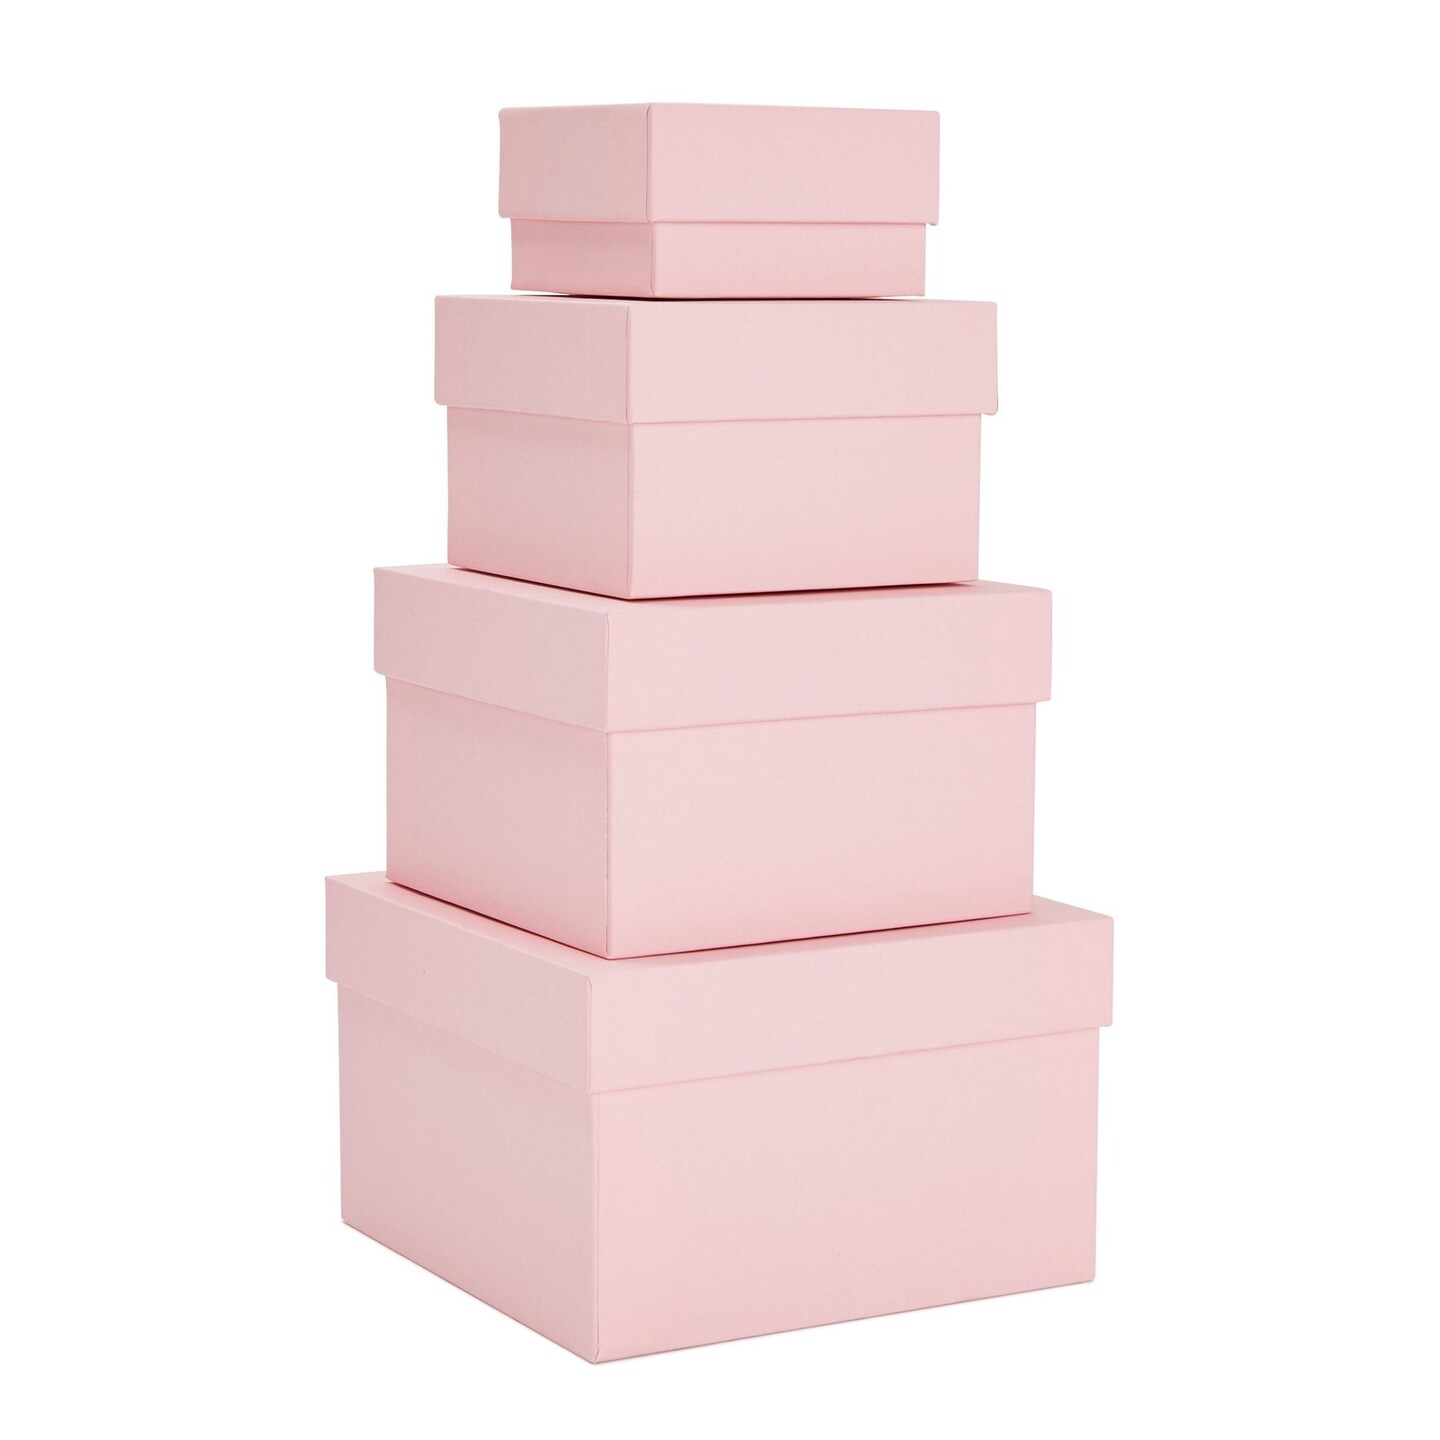 4 Pack Square Nesting Gift Boxes, Decorative Boxes with Lids in 4 Assorted Sizes for Wedding Reception, Bridal Shower, Baby Shower, Anniversary, Birthday Party Goodie Boxes (Pink)